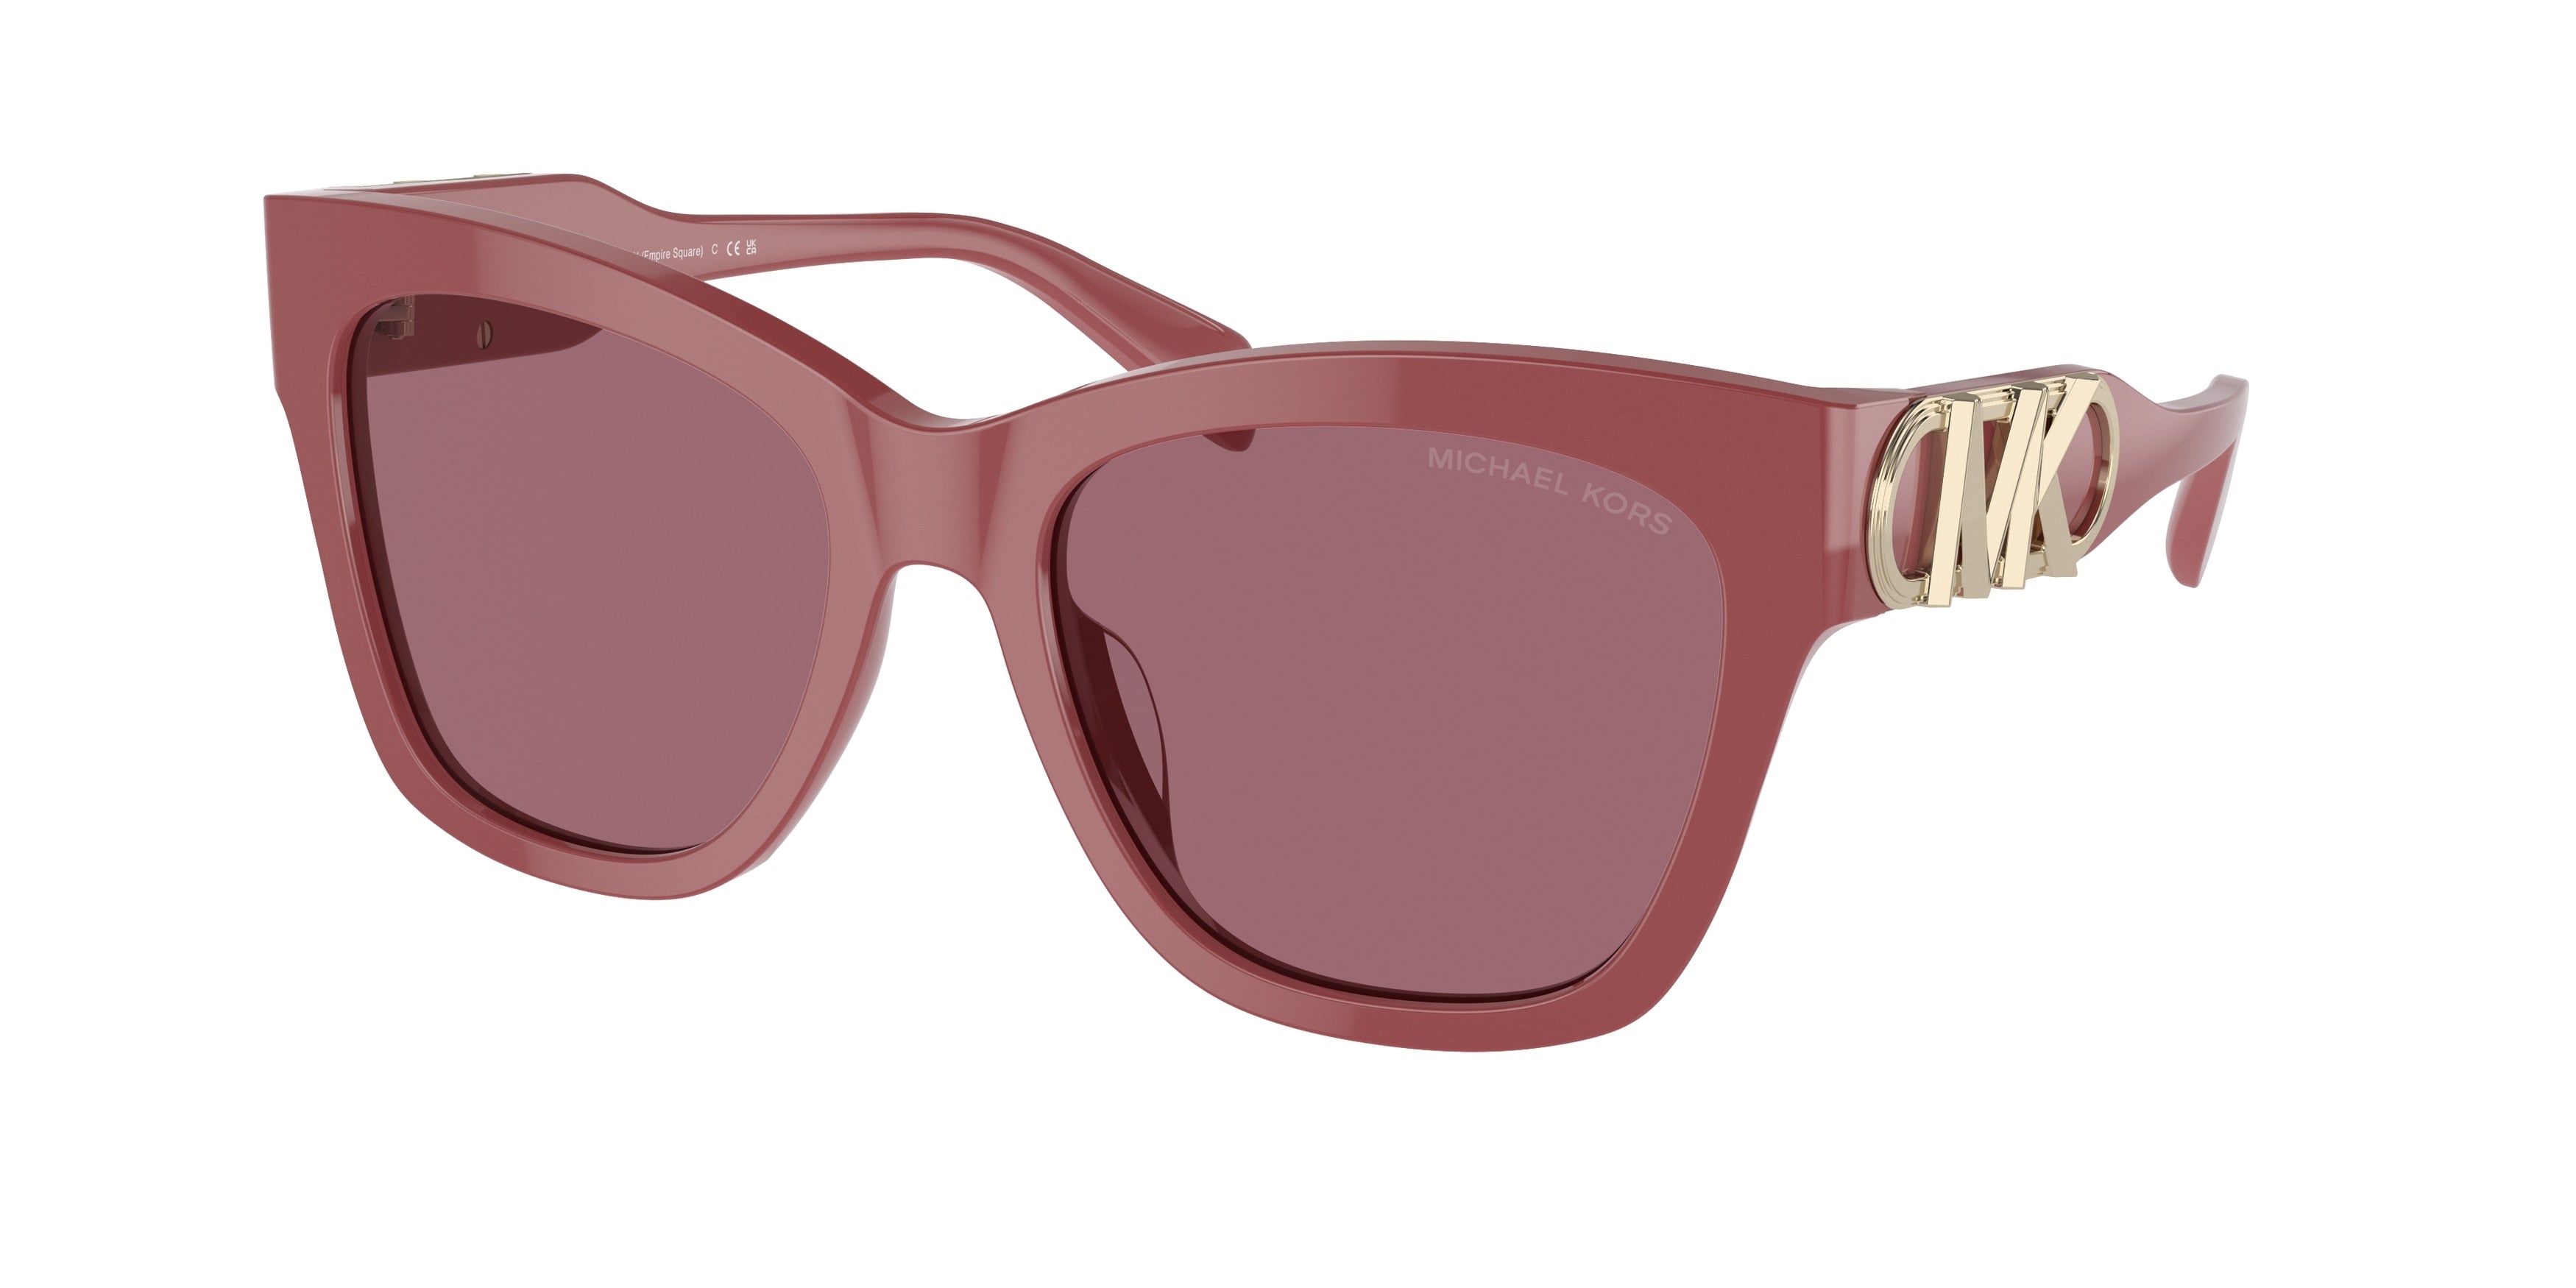 Michael Kors EMPIRE SQUARE MK2182U Butterfly Sunglasses  32566G-Dusty Rose 55-140-18 - Color Map Pink